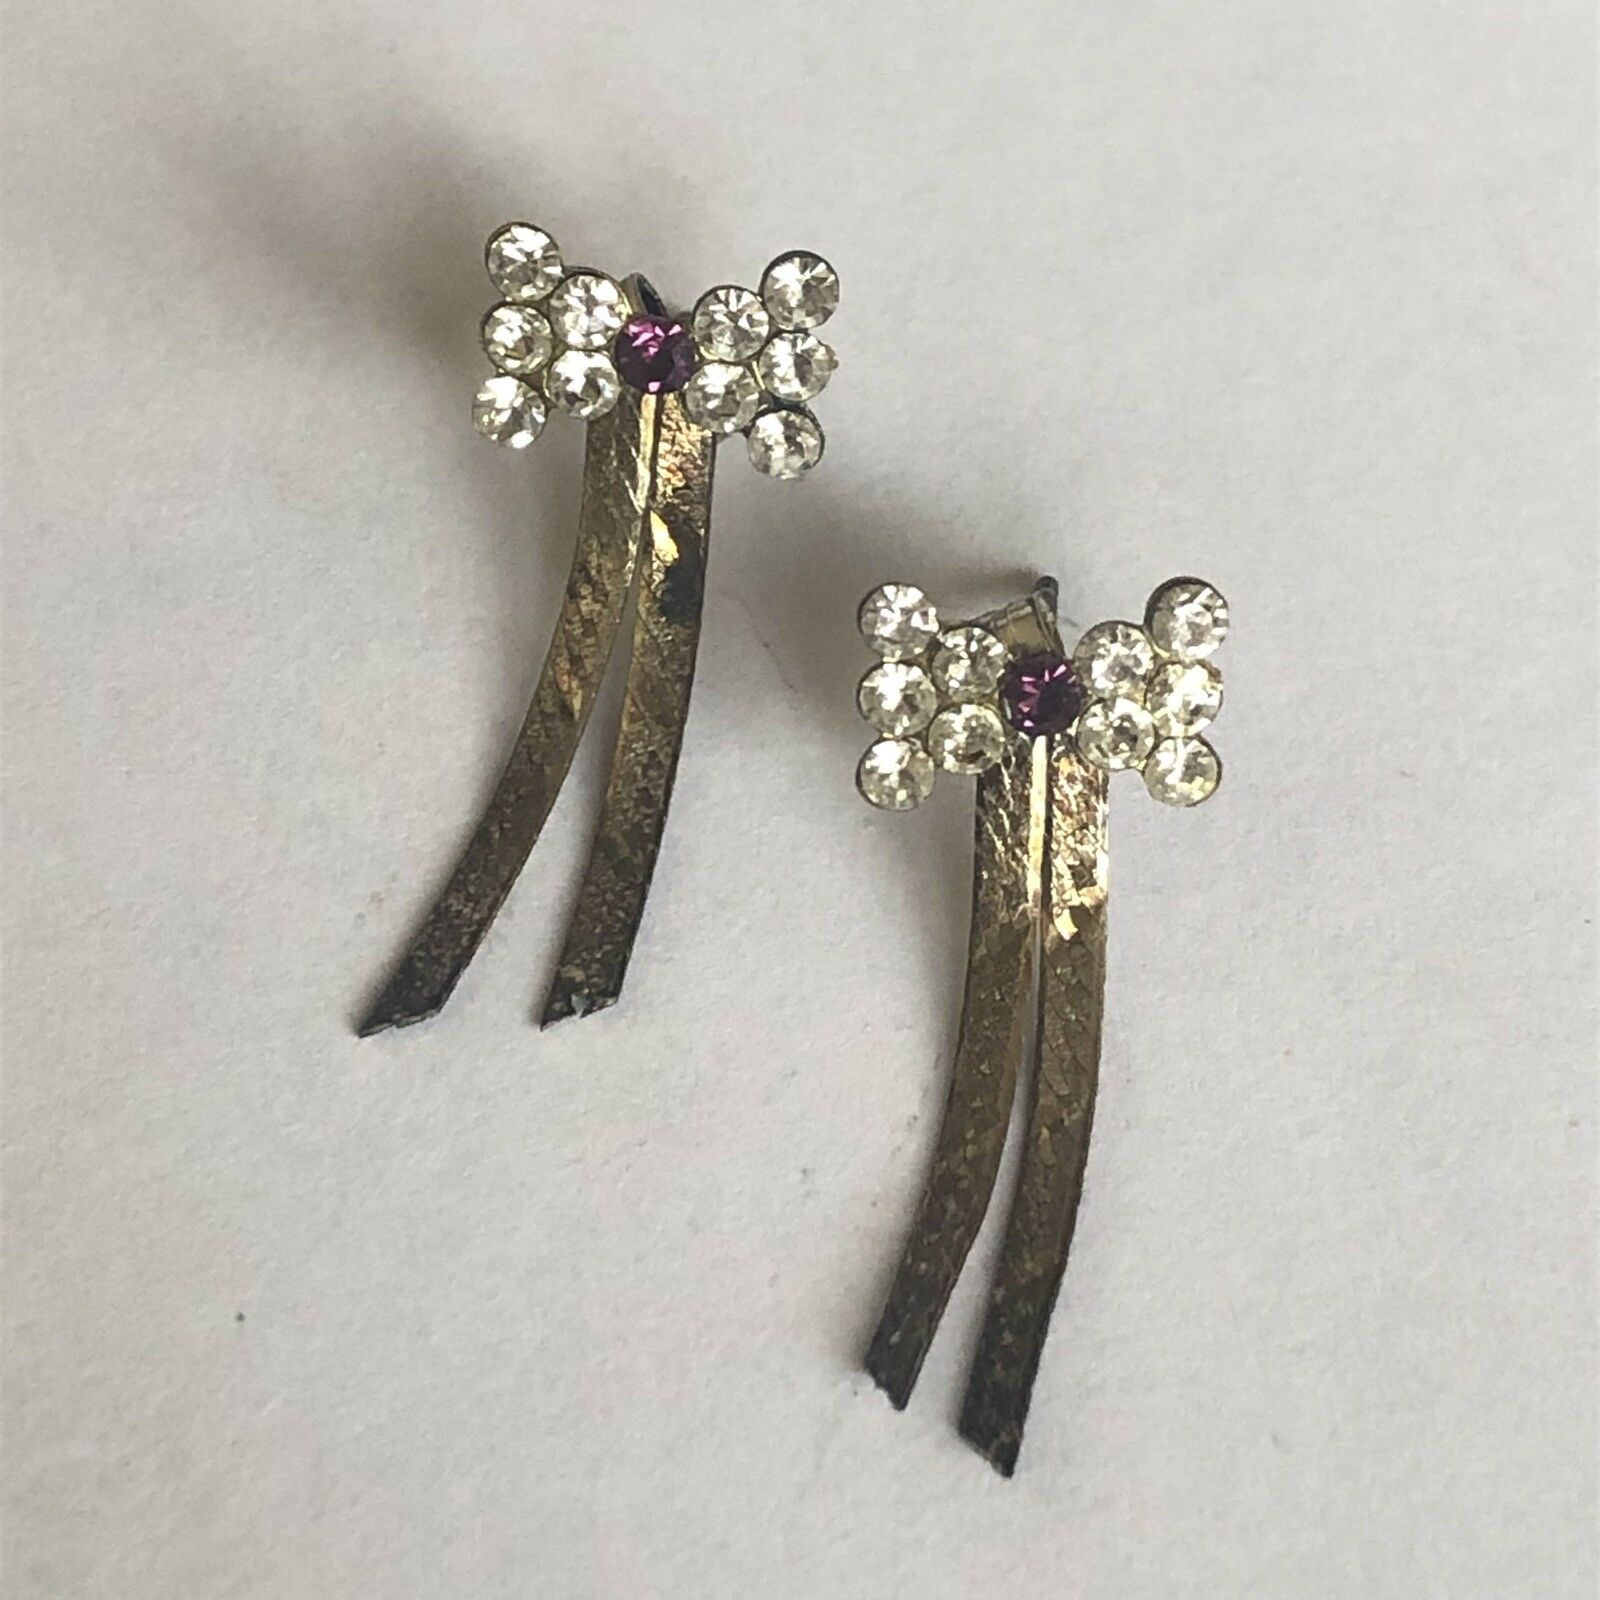 A pair of vintage silver stylised bow earrings